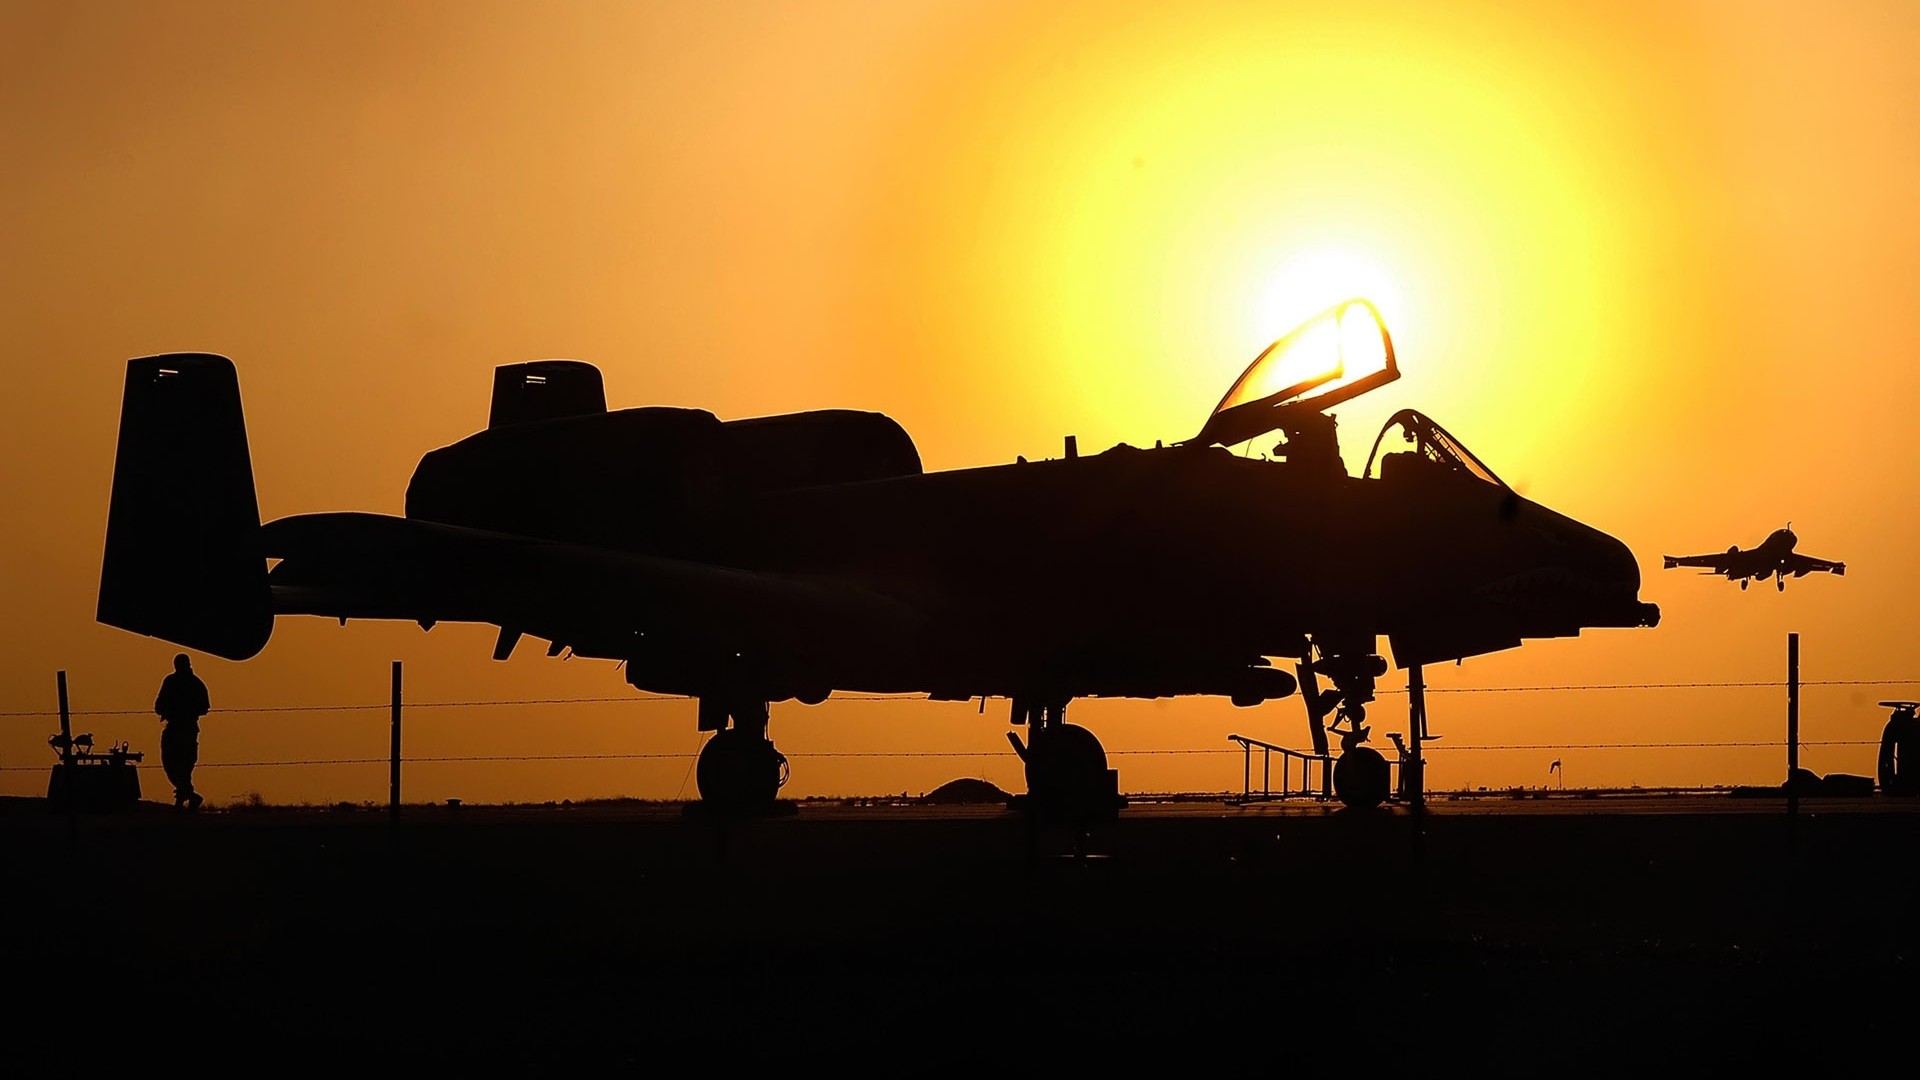 military Aircraft, Airplane, Jets, Silhouette, Sunlight Wallpaper